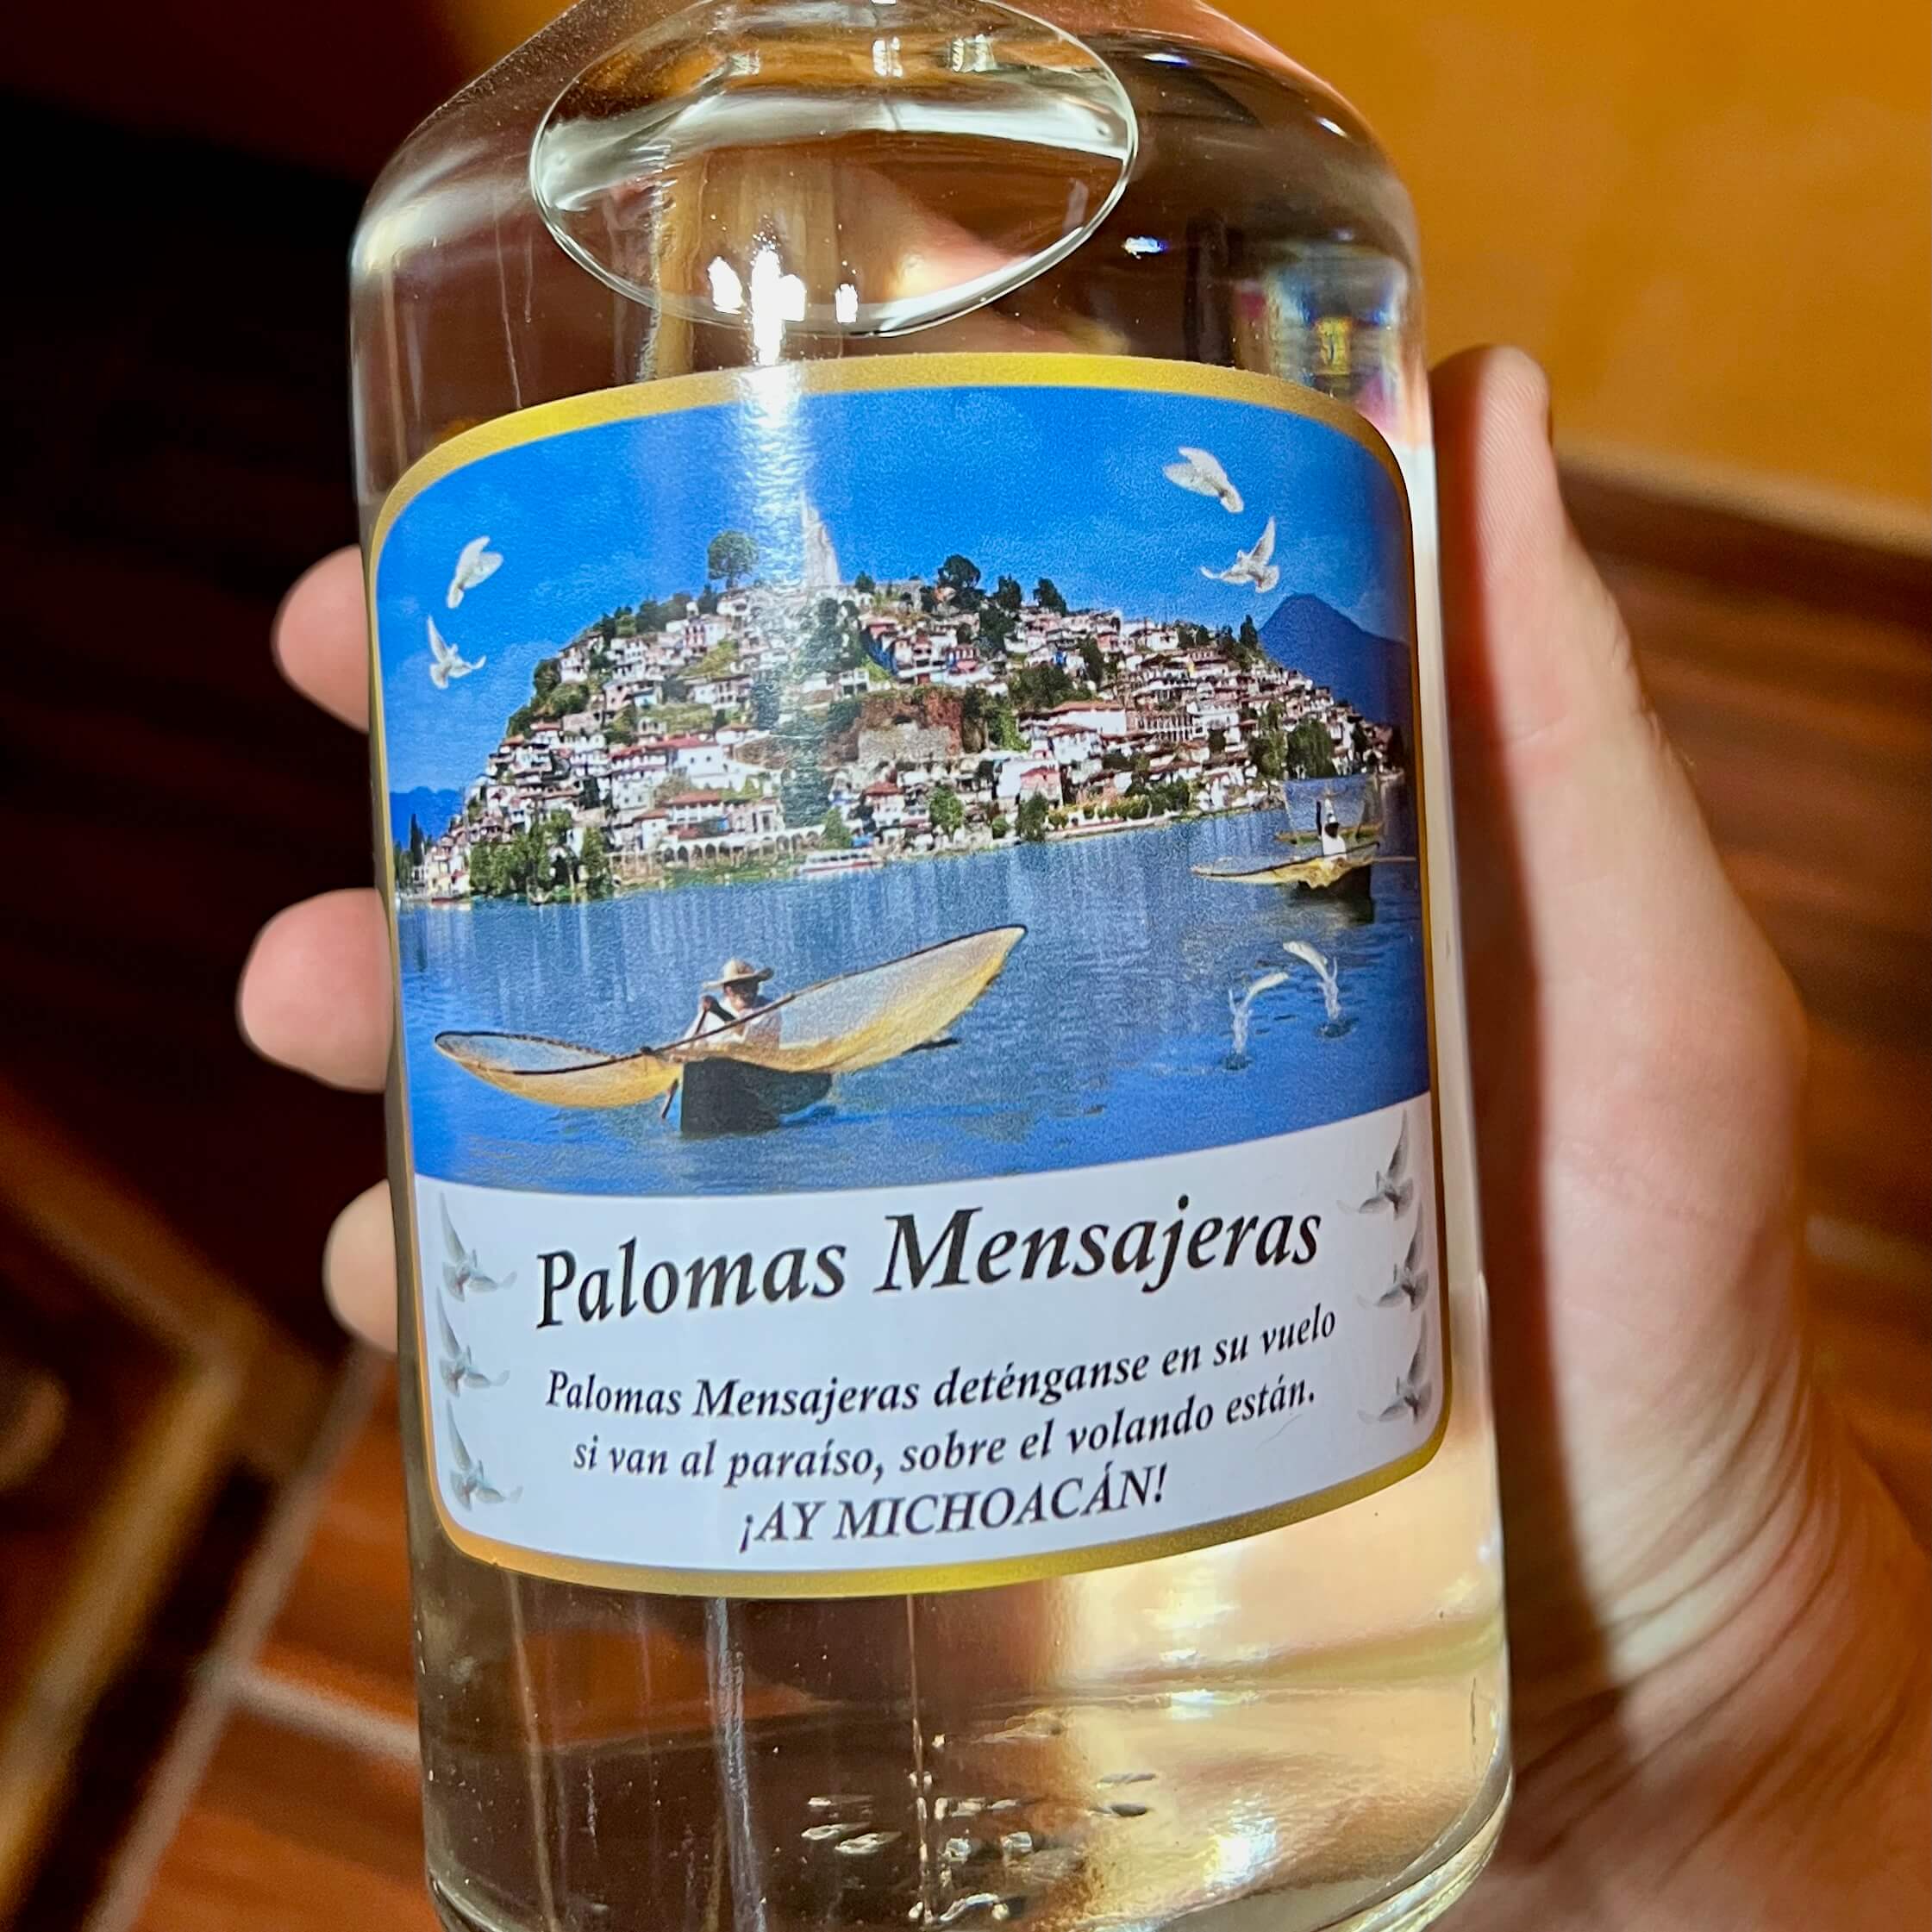 Palomas Mensajeras bottle with the old label